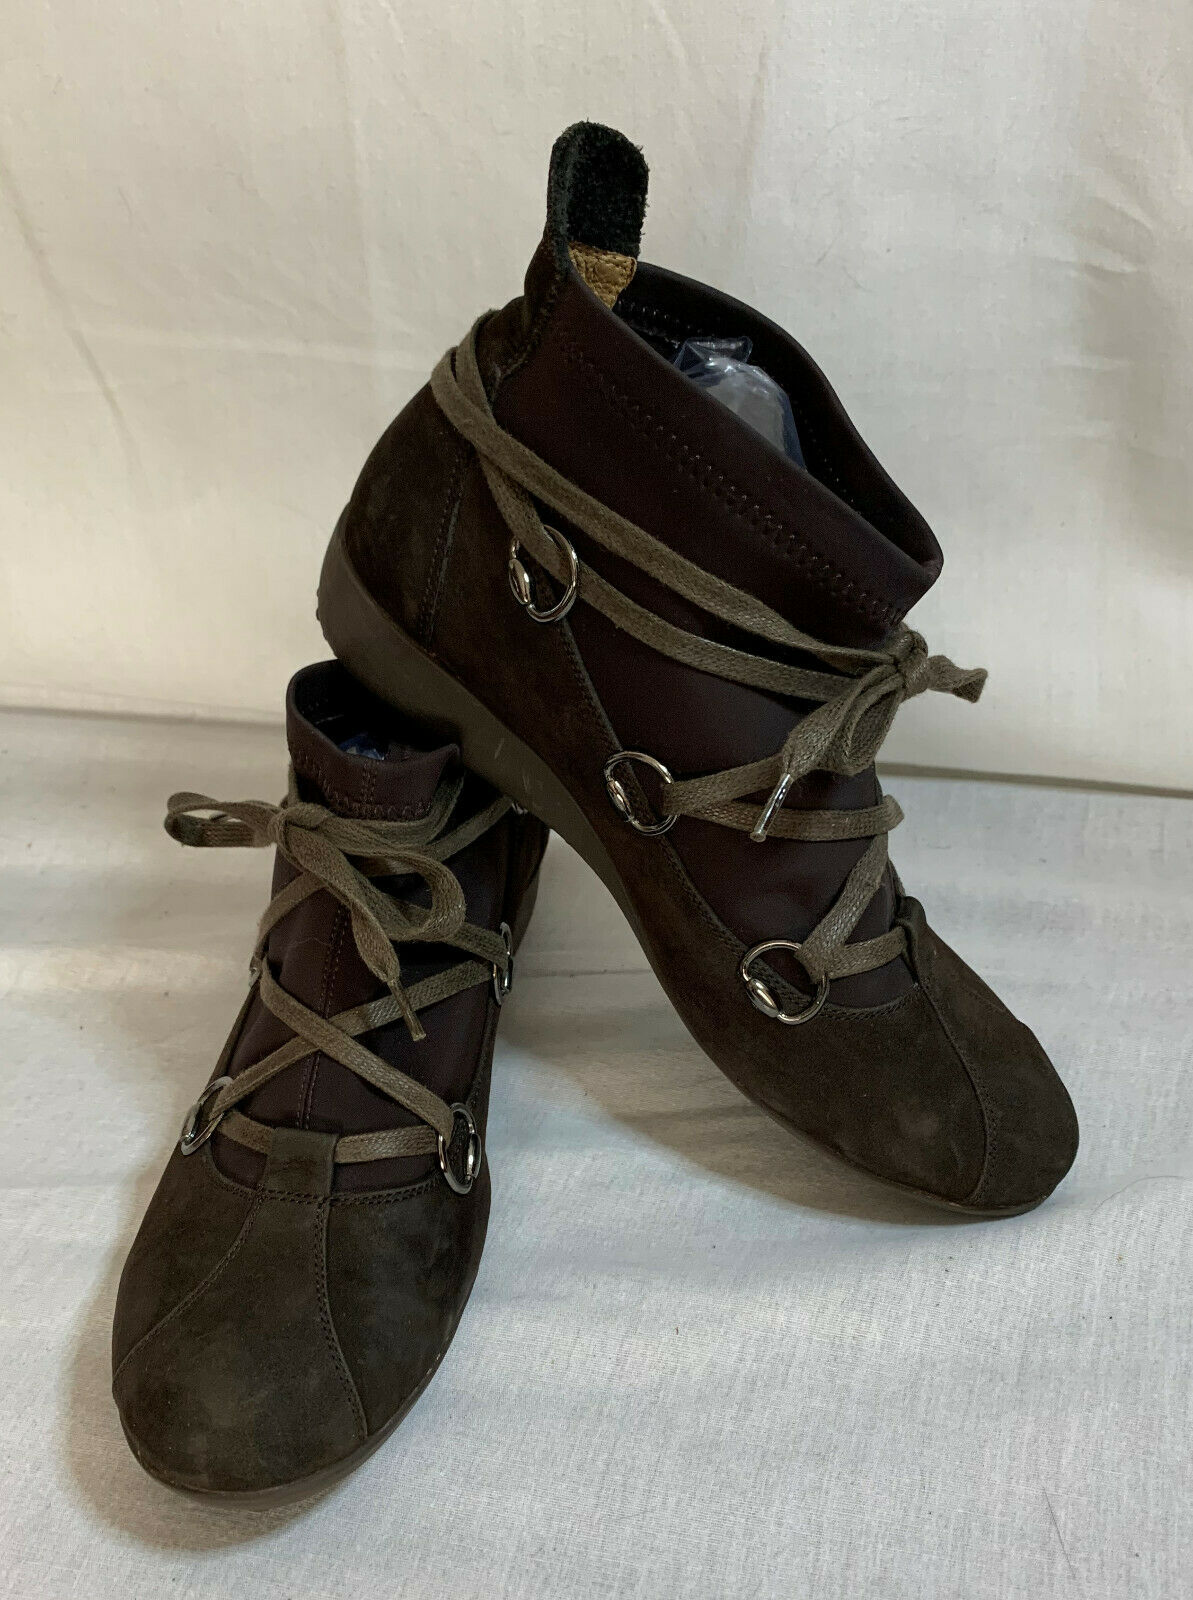 Milano Square AB Future Europe Athletic Walking Shoes Ankle Boots Size 9 Brown